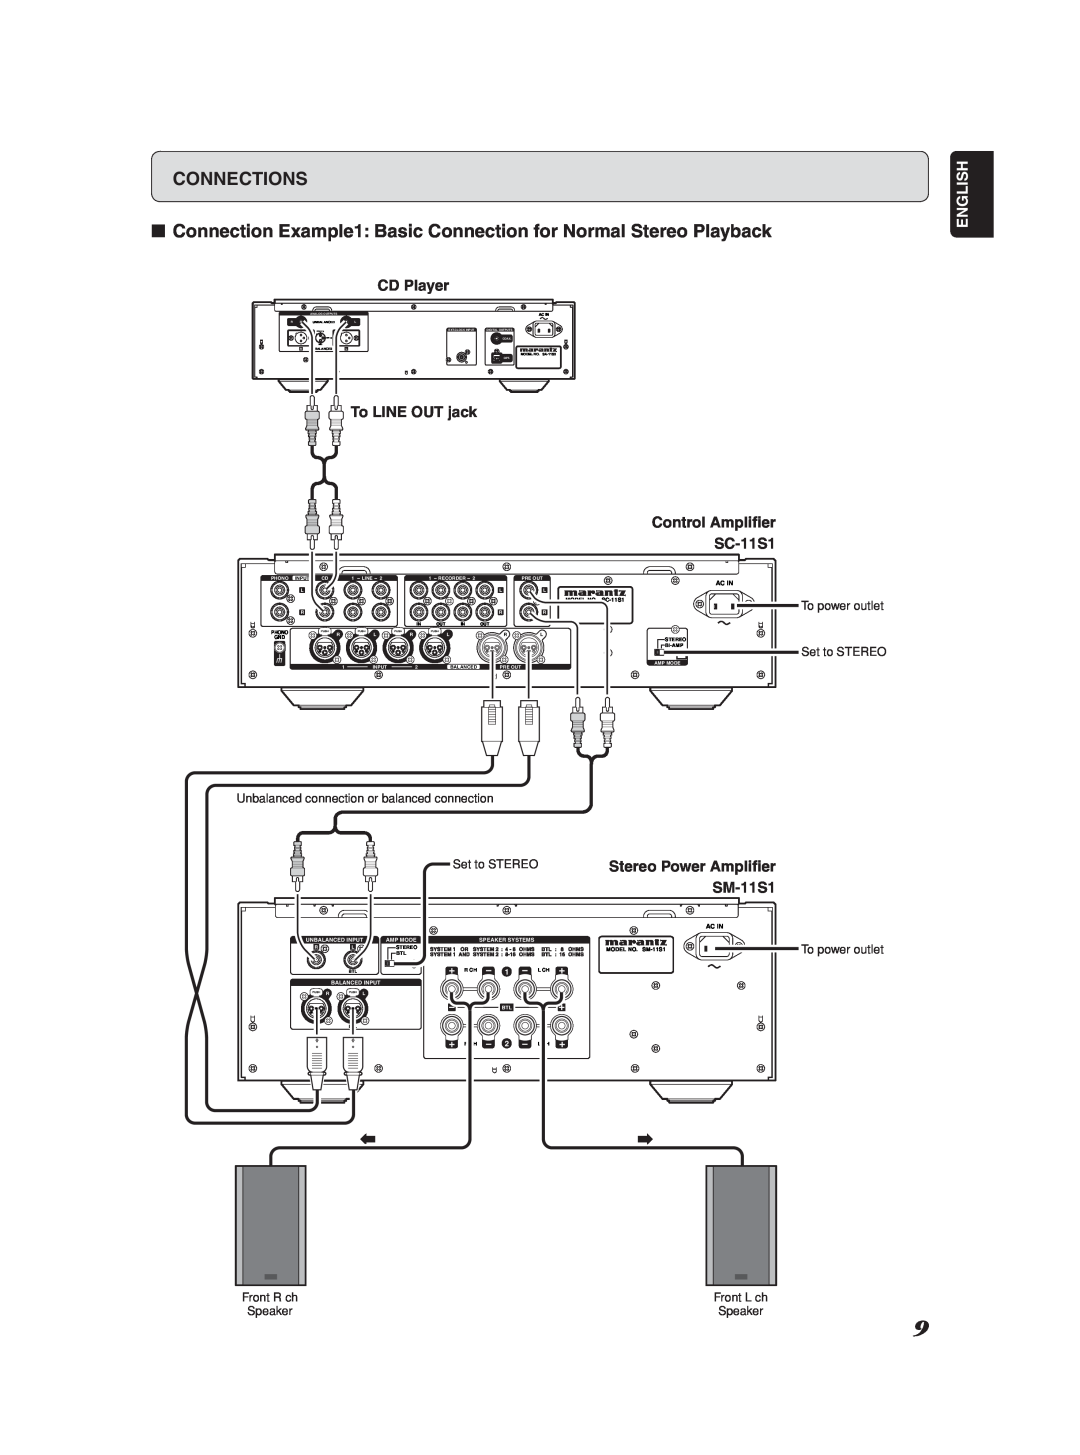 Marantz SM-1151 Connections, Control Ampliﬁer, SC-11S1, English, Stereo Power Ampliﬁer, Set to STEREO, To power outlet 